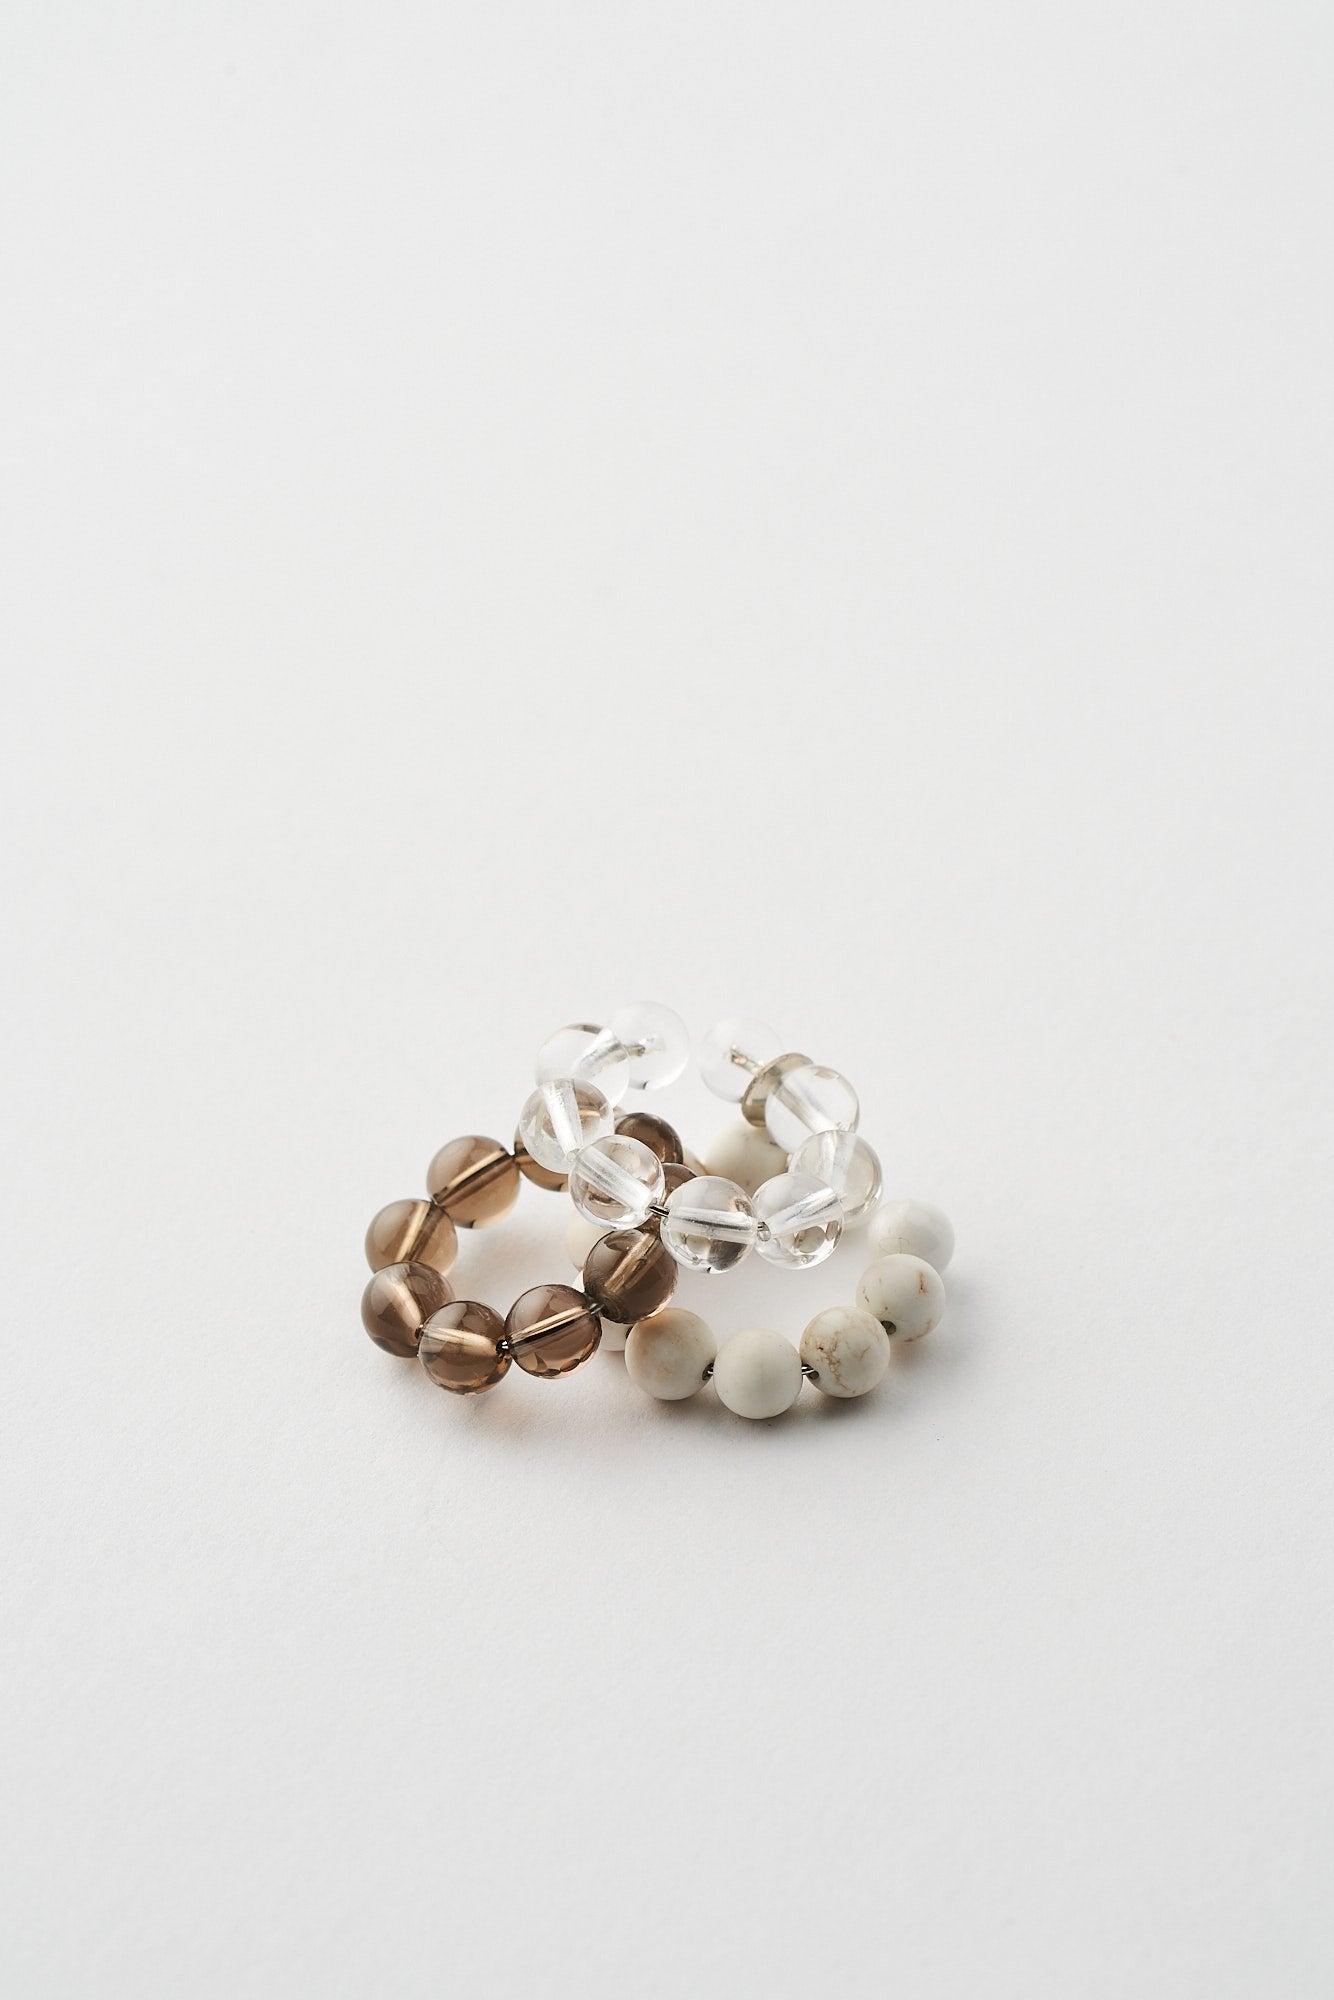 Mussels and Muscles Small Spheres Earcuff